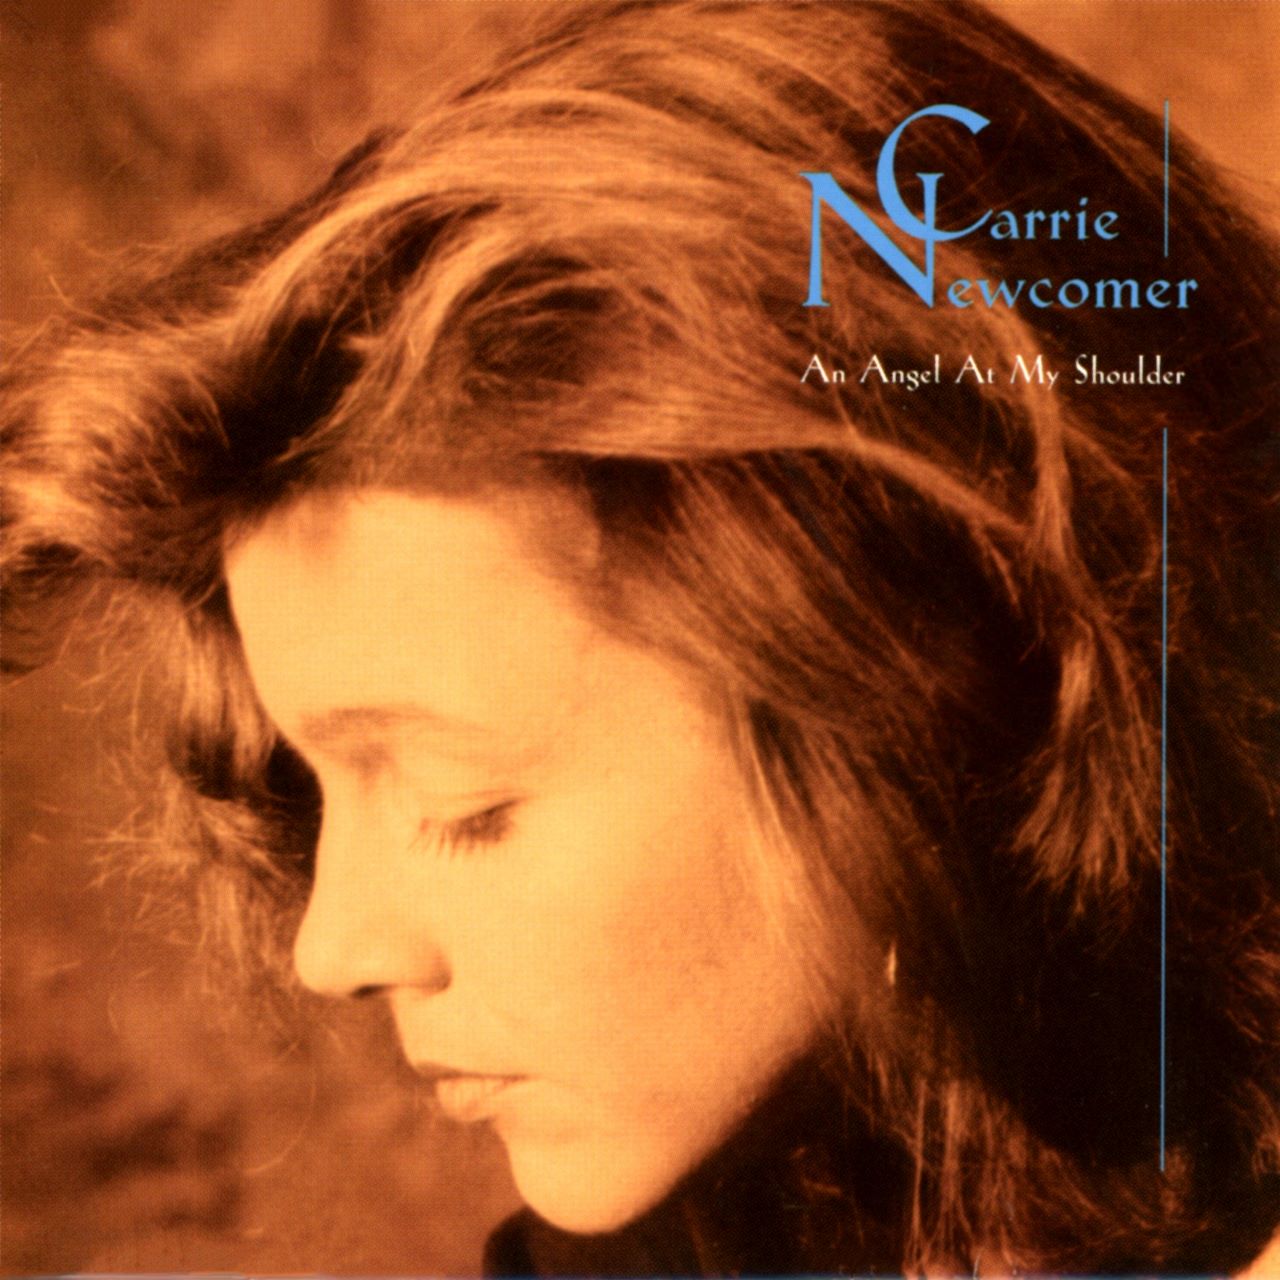 Carrie Newcomer - An Angel At My Shoulder cover album